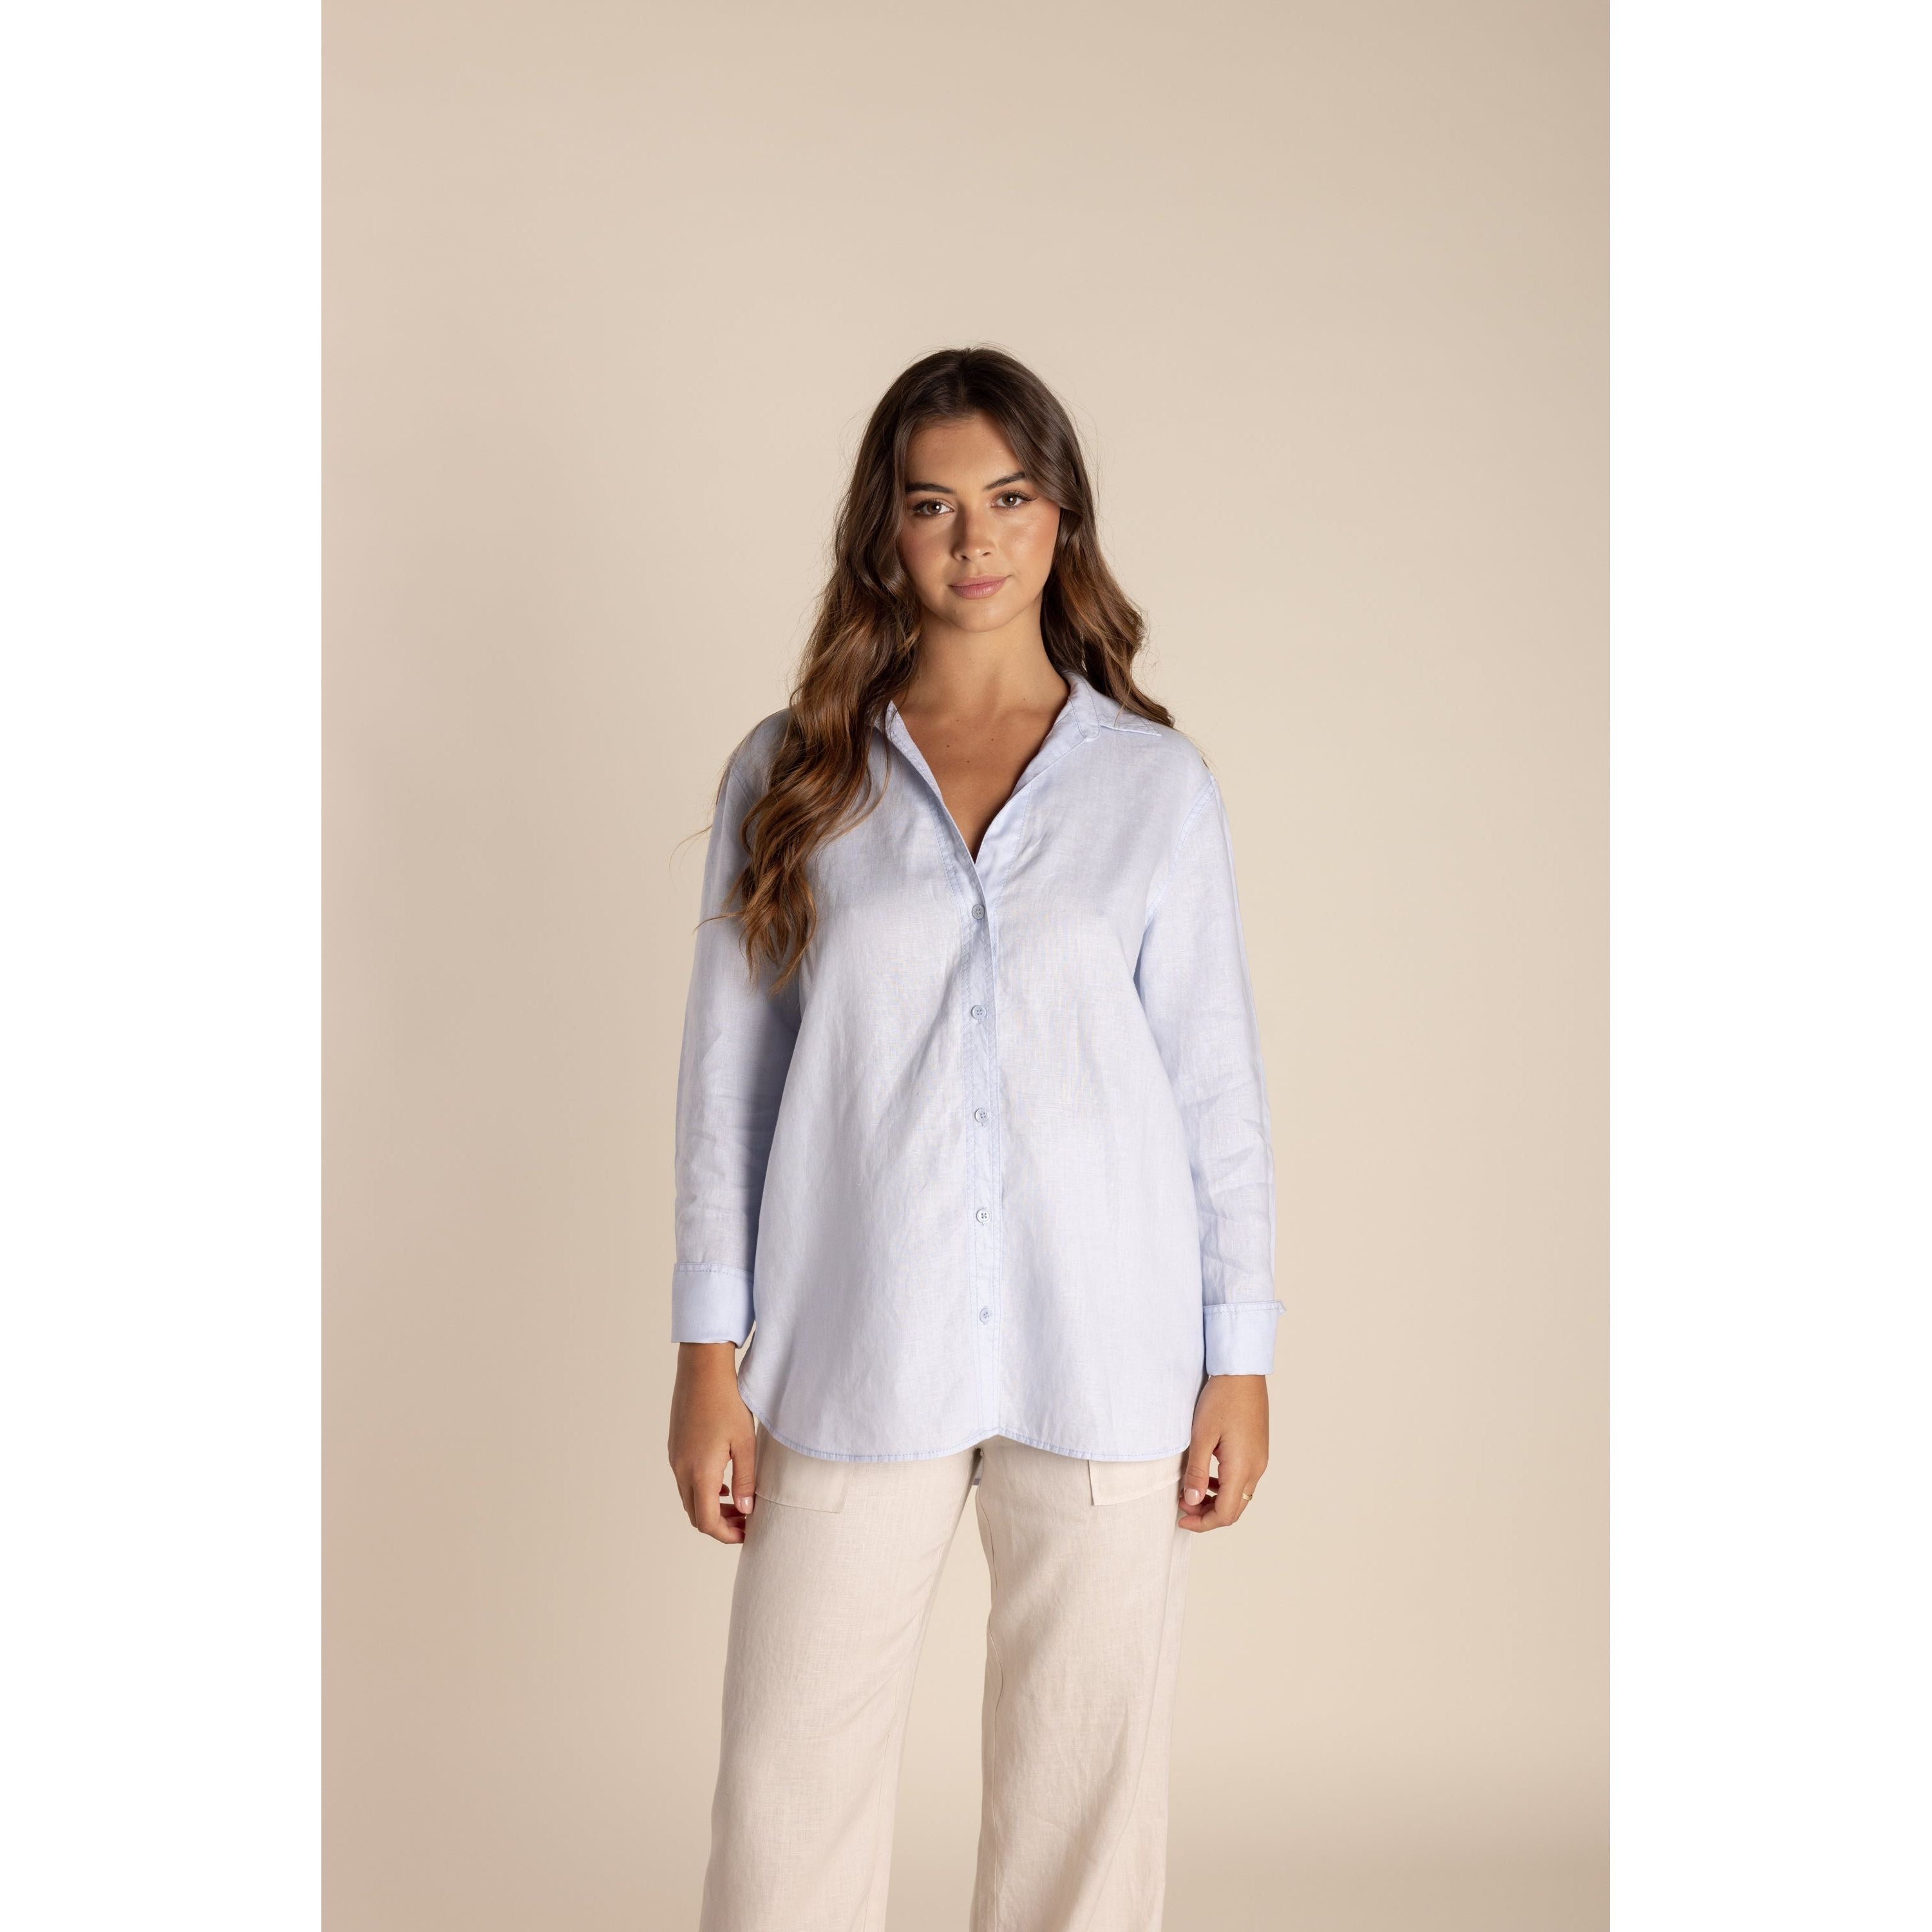 Two T's - Linen Soft Shirt Ice Blue